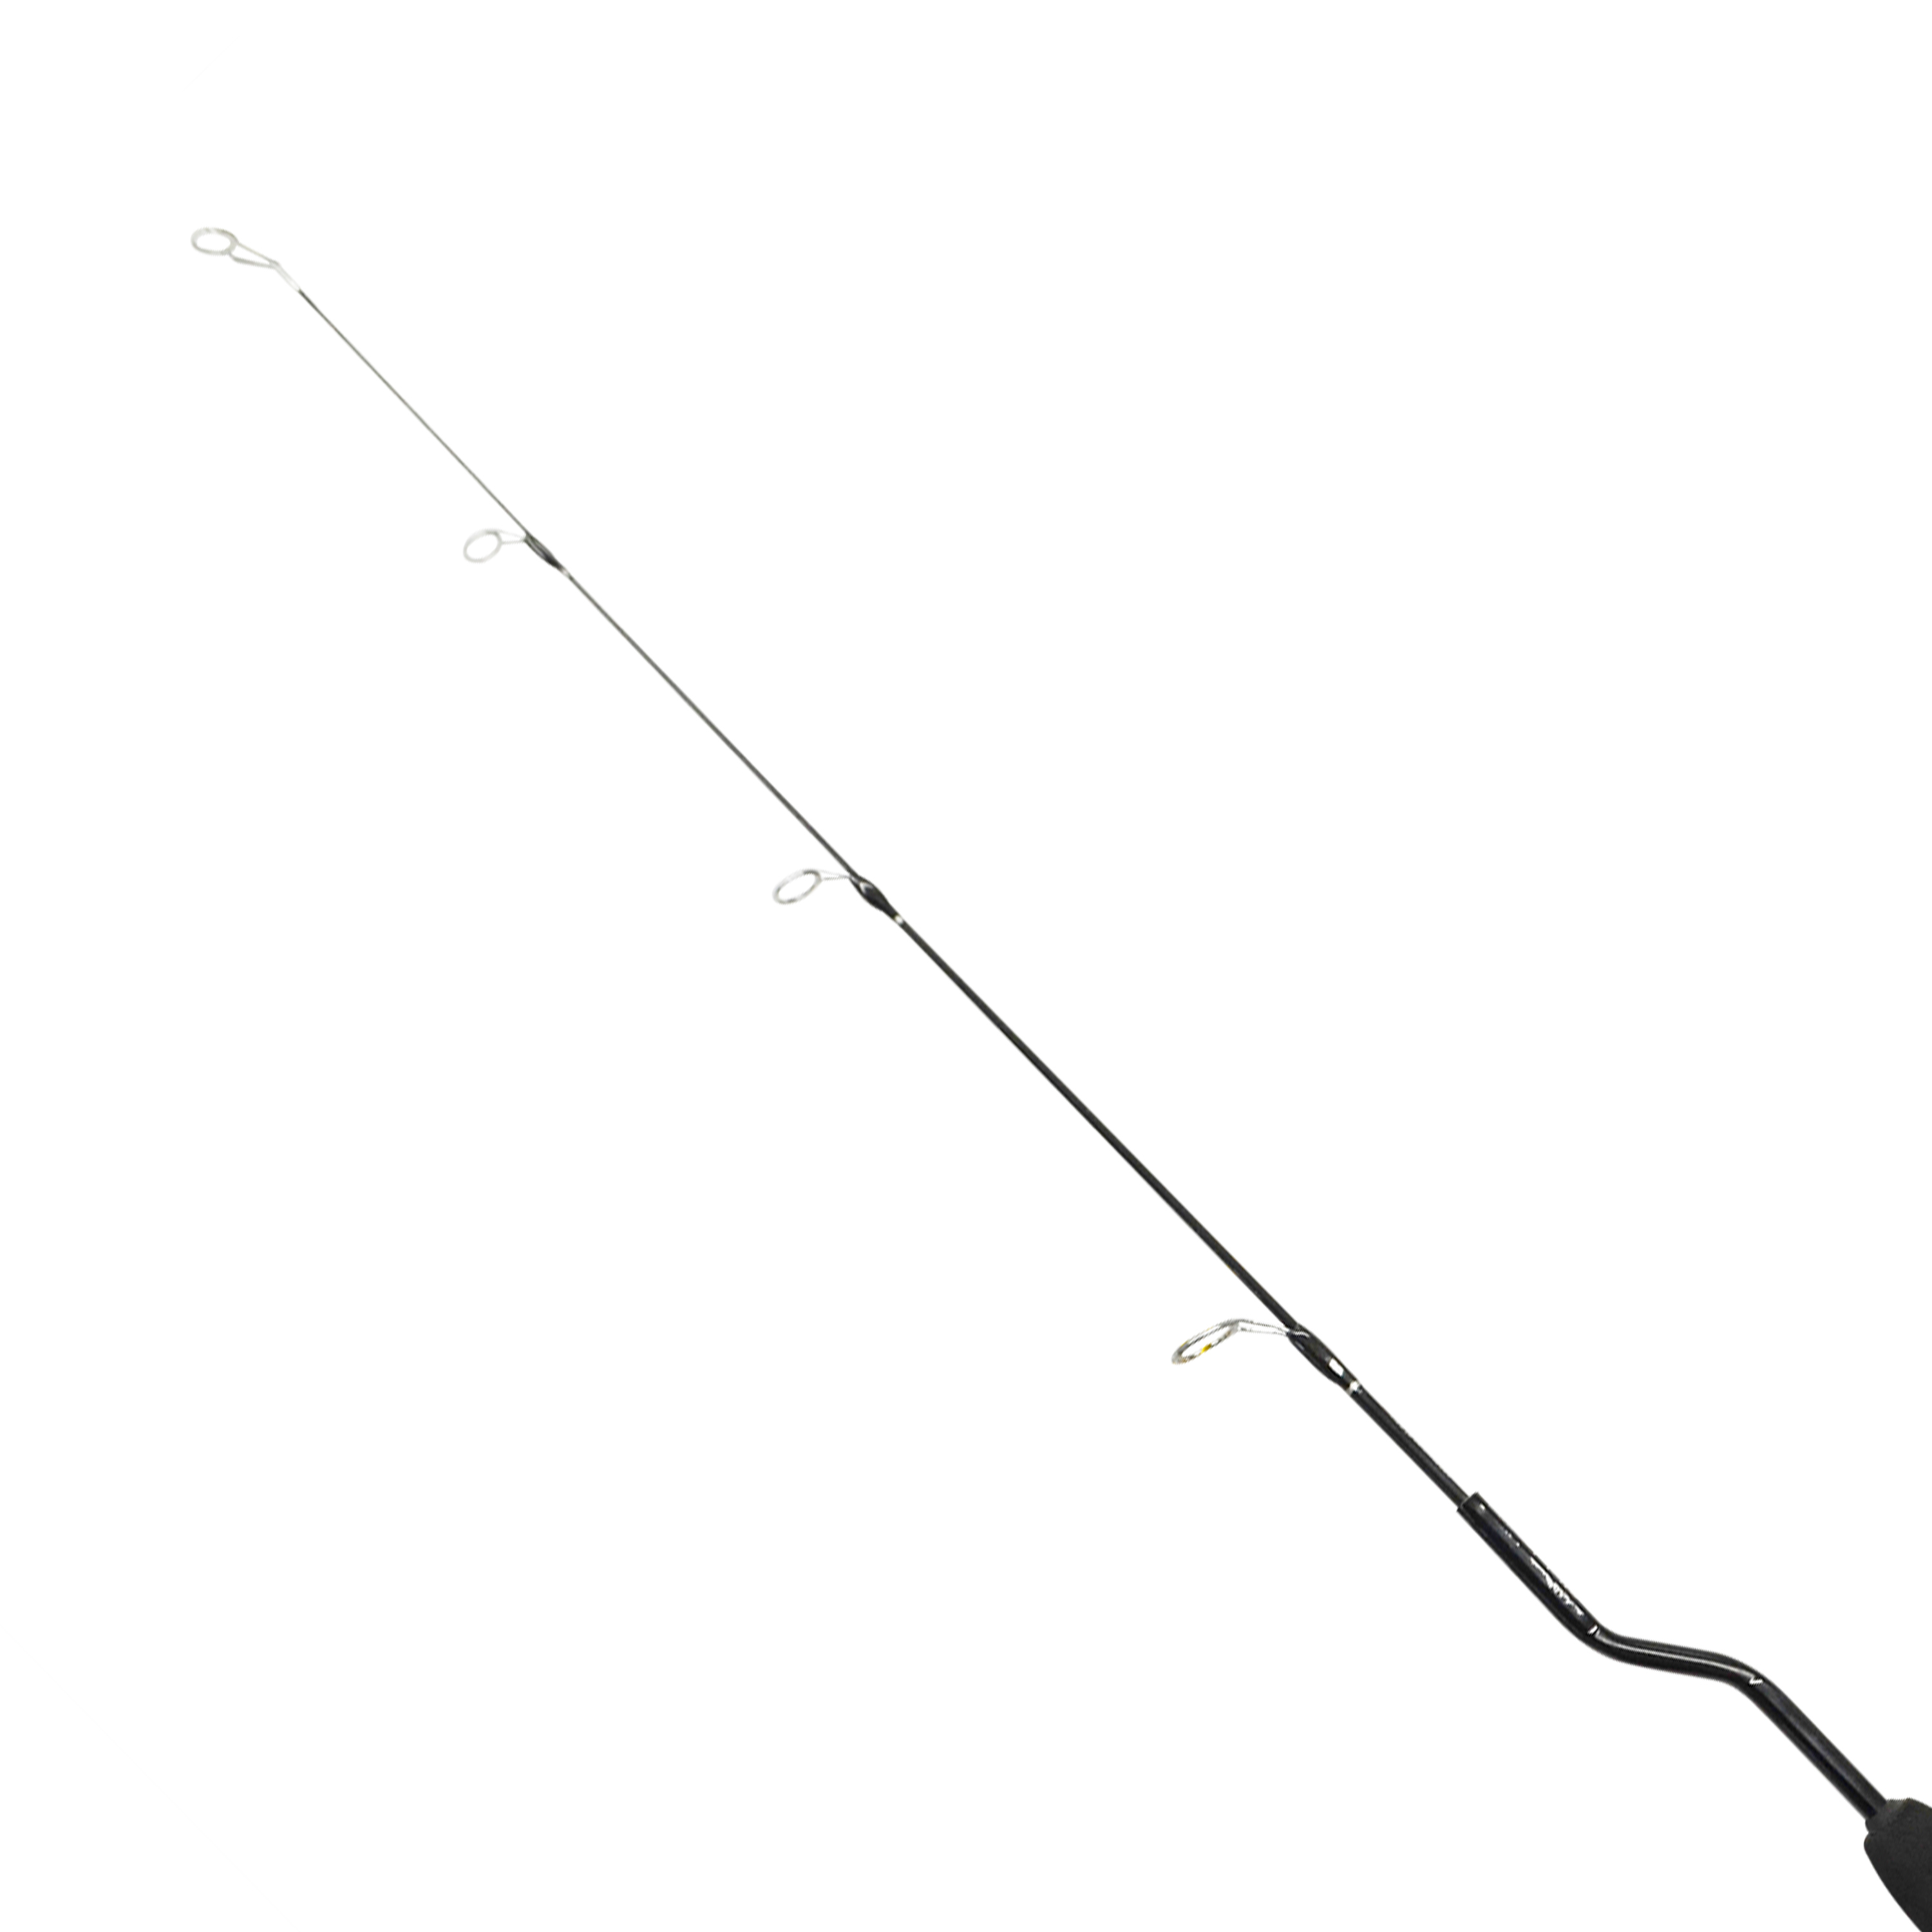 HT Enterprises Slick Ice Fishing Rod and Reel Combo, 28" Medium Action Rod and Reel - image 3 of 3